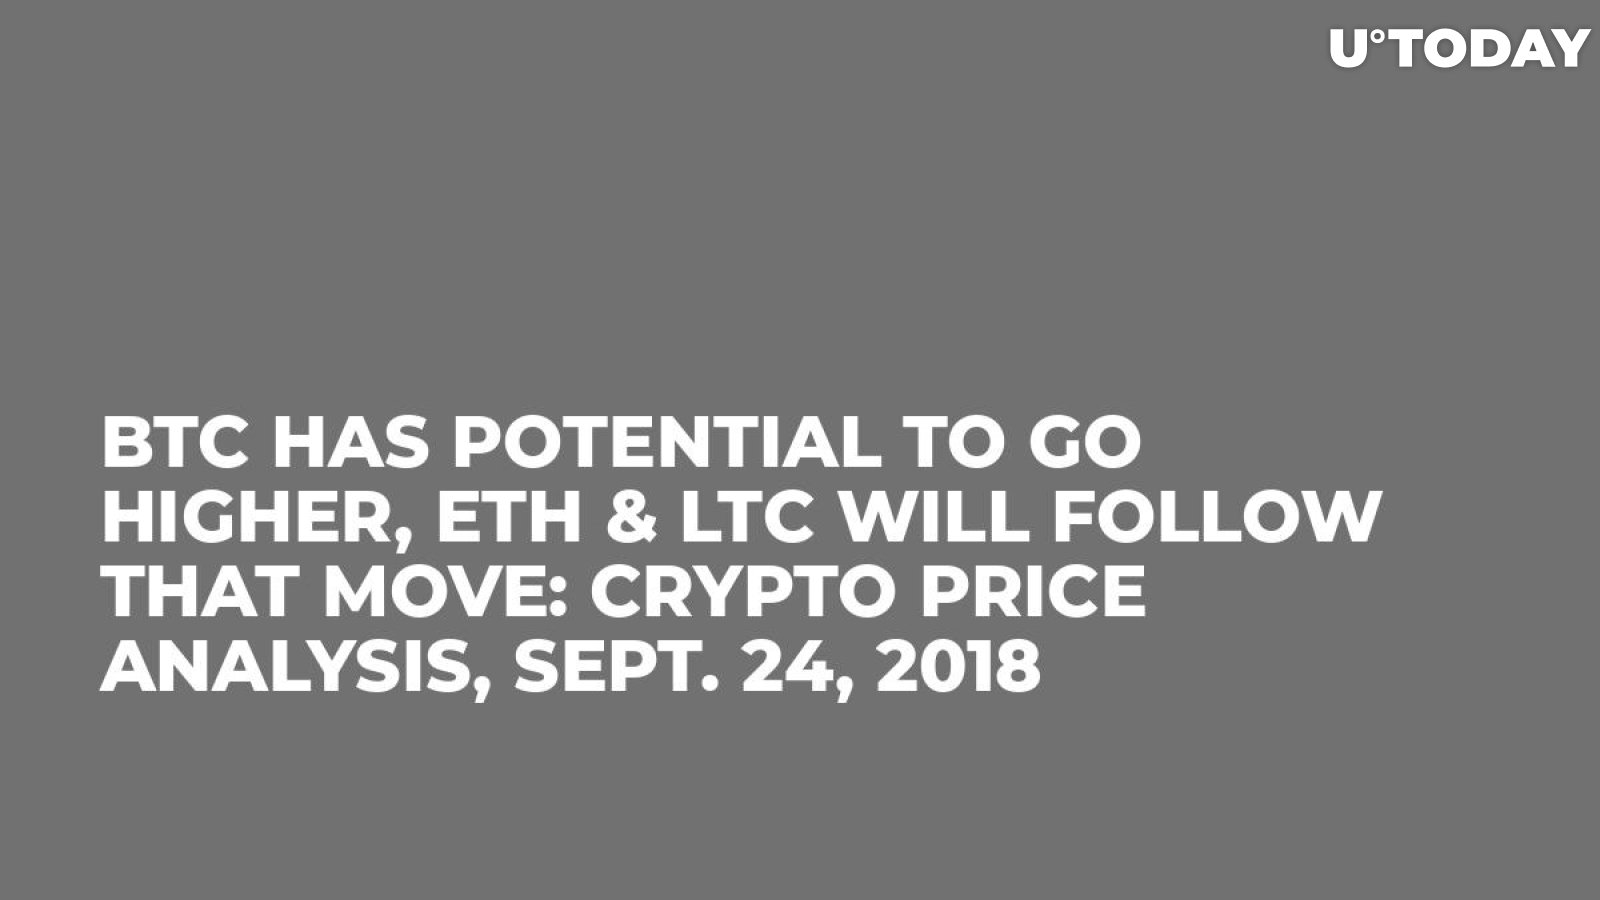 BTC Has Potential to Go Higher, ETH & LTC Will Follow That Move: Crypto Price Analysis, Sept. 24, 2018